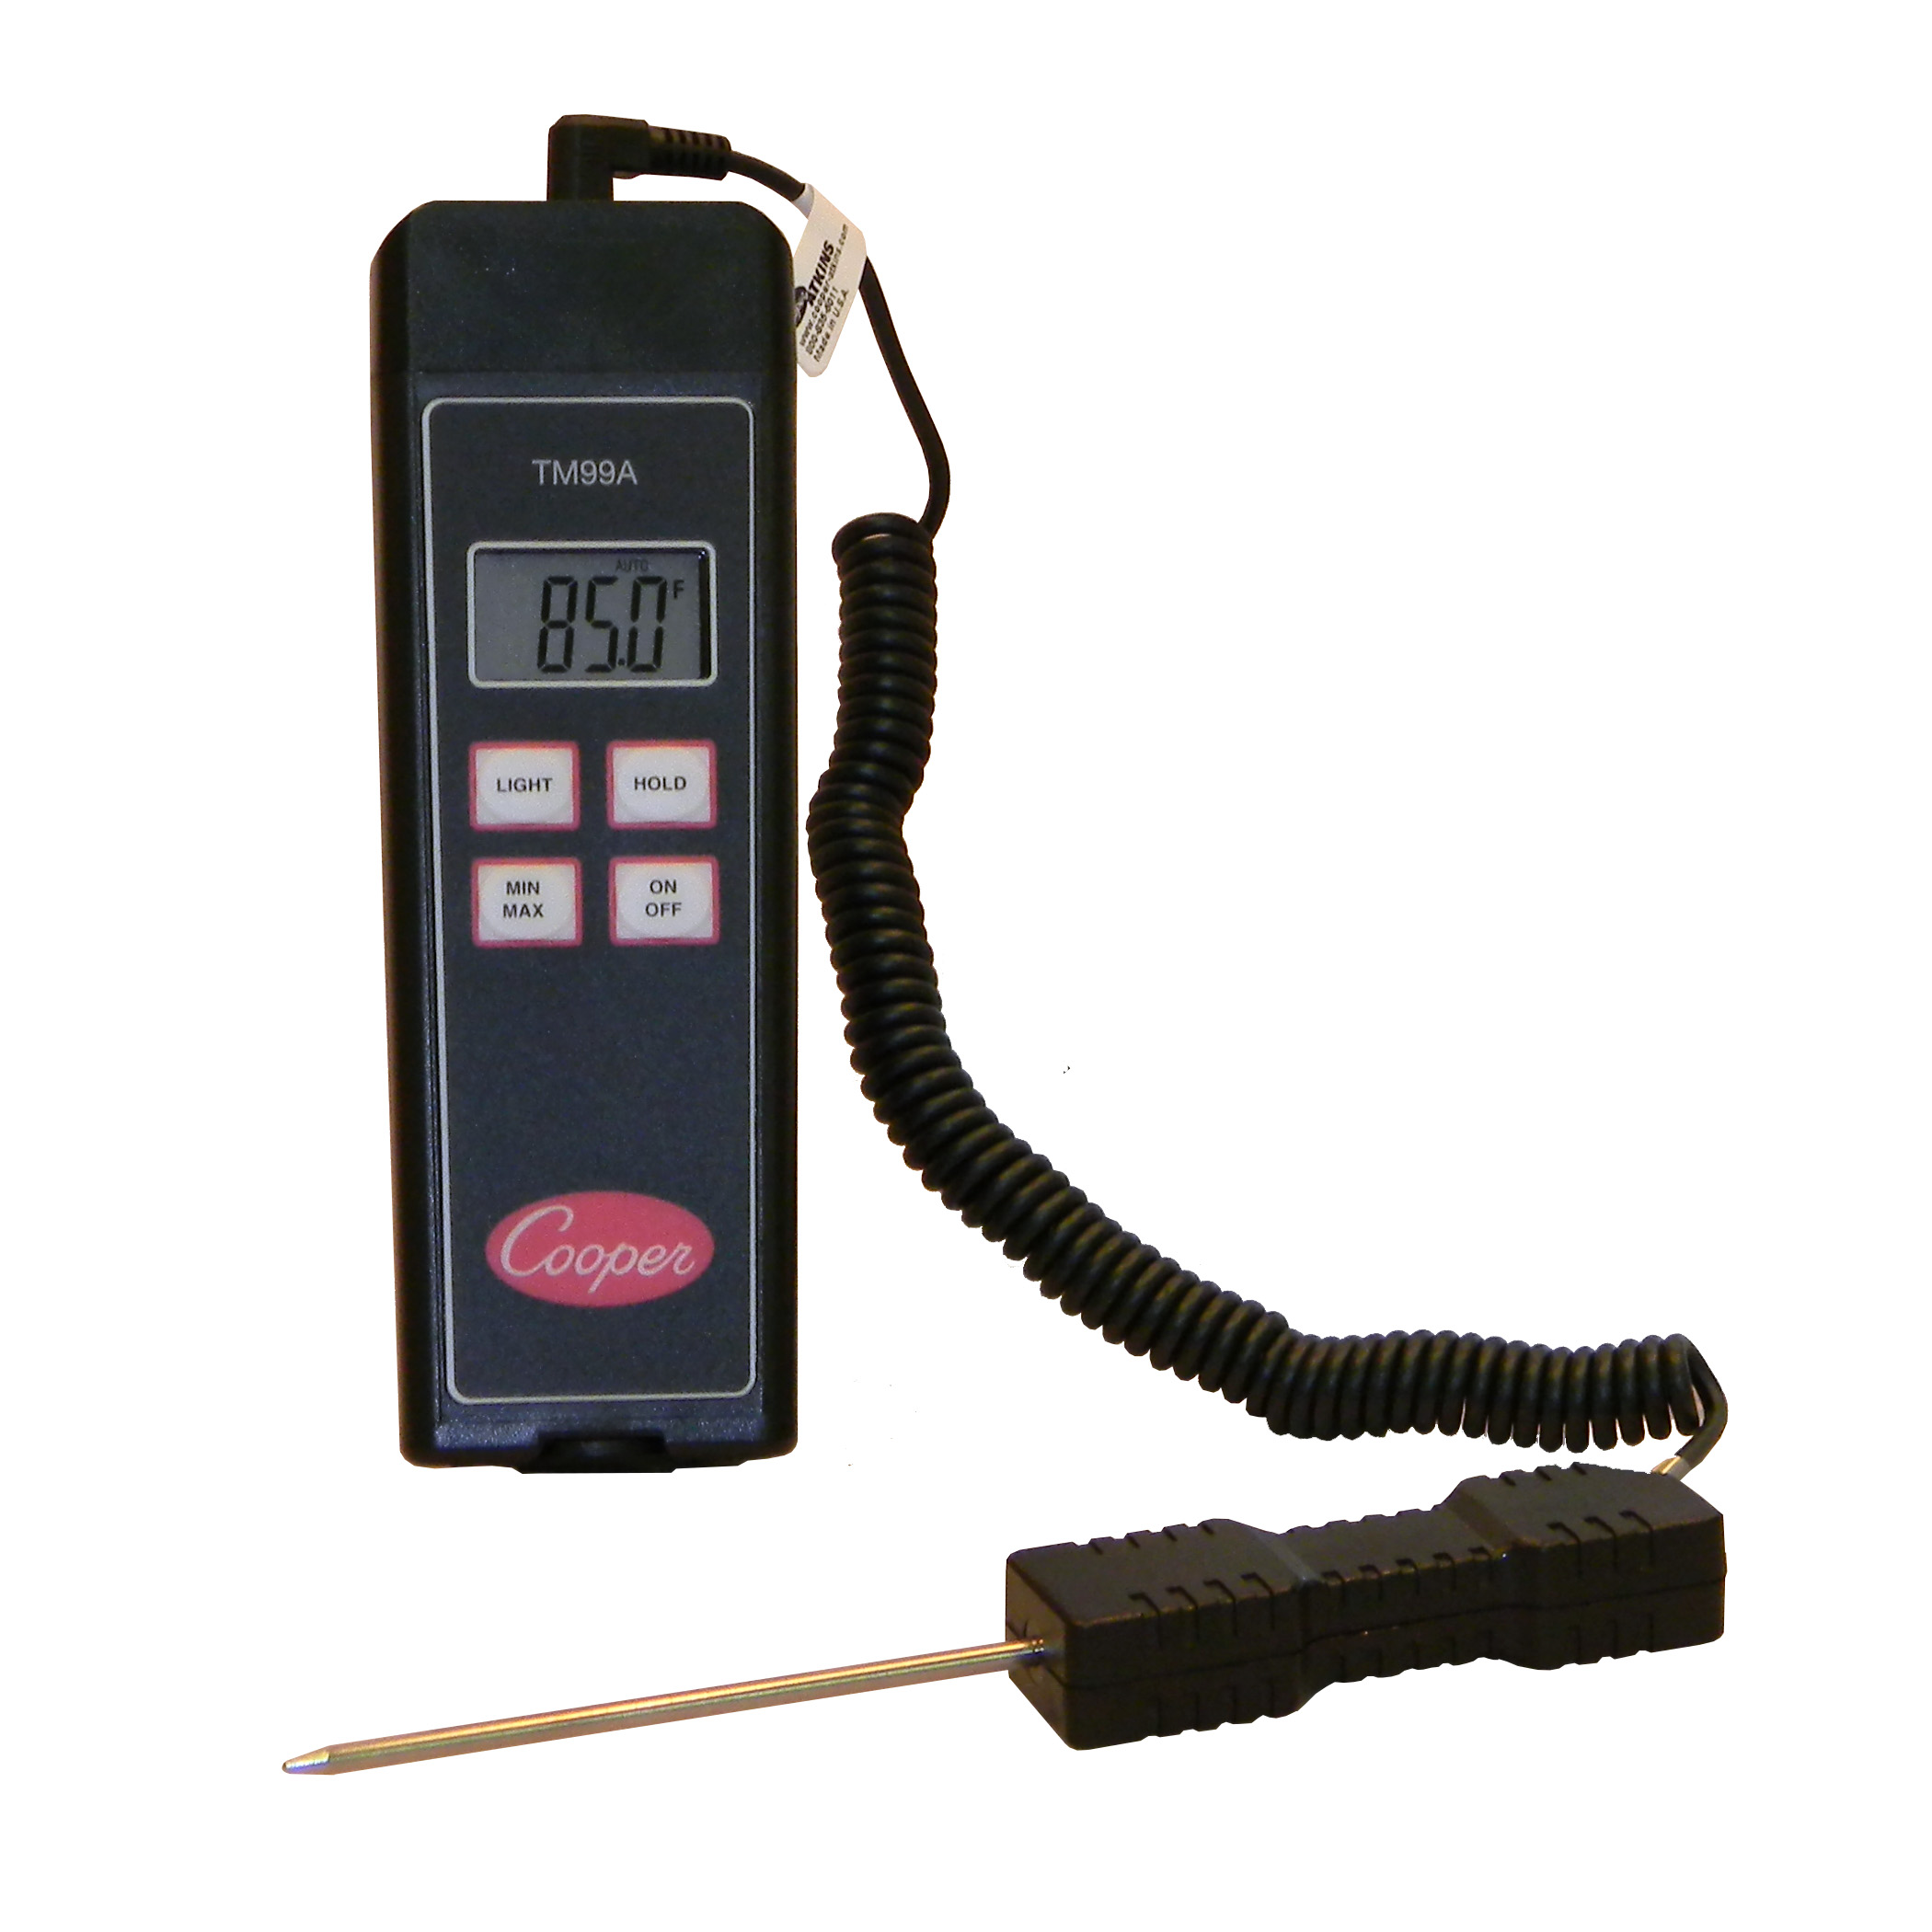 Digital Laboratory Thermometers ICL Calibration